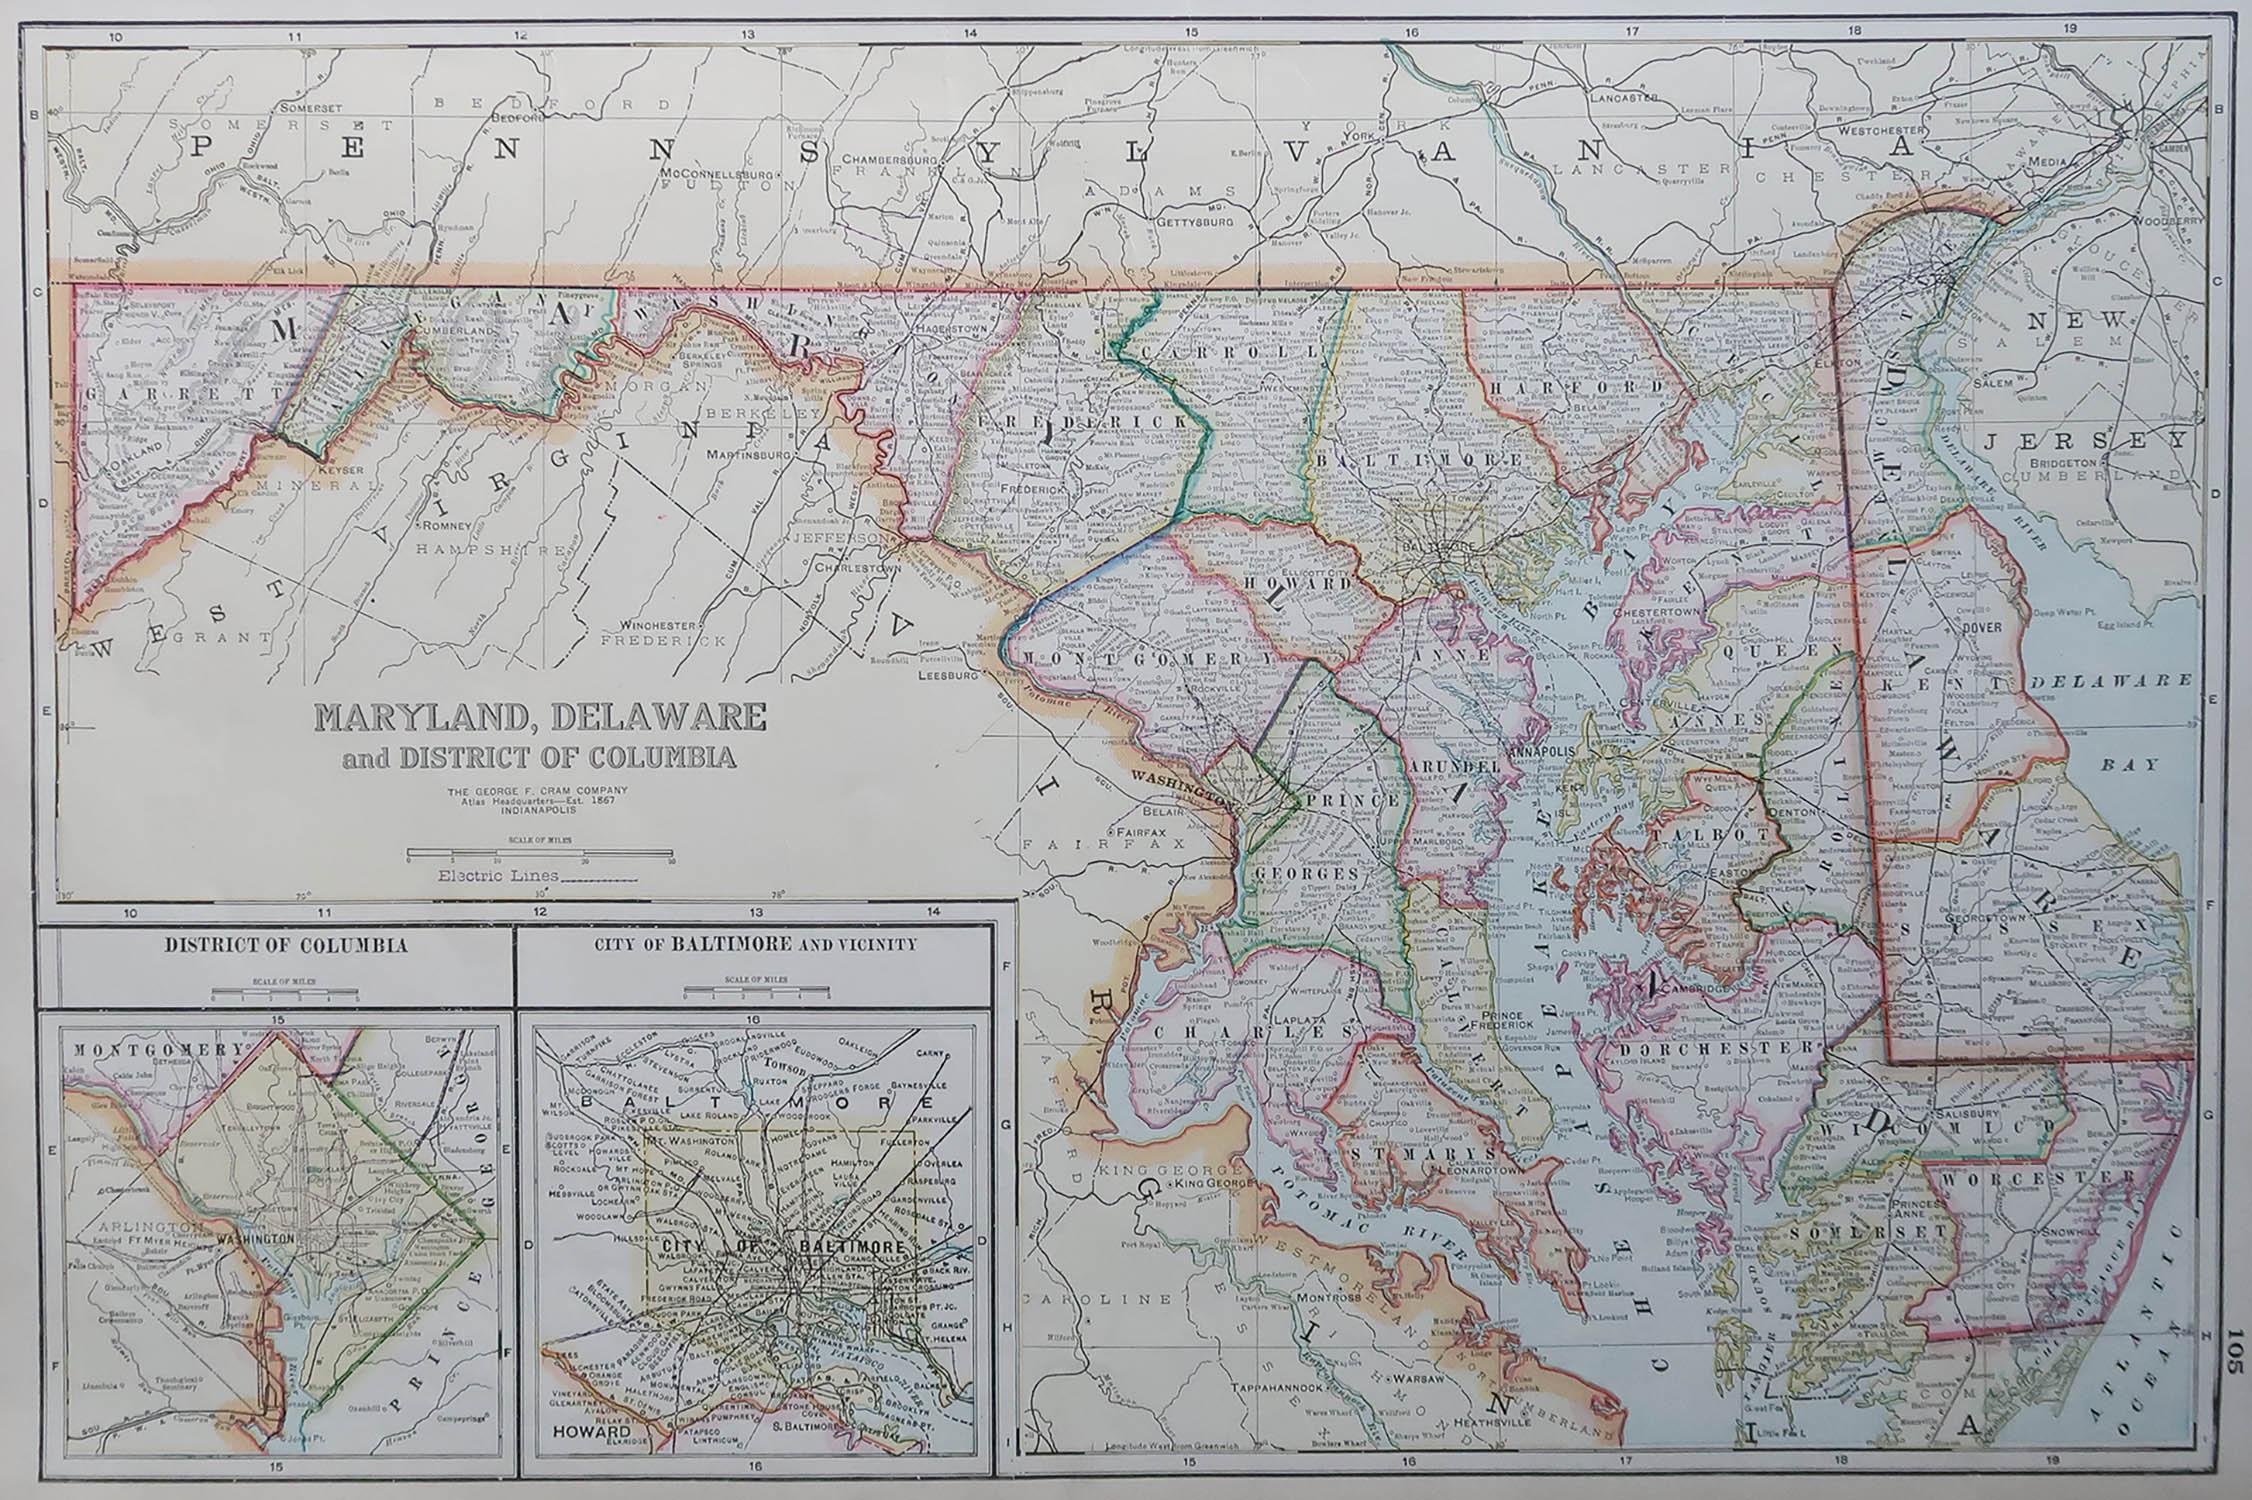 Fabulous map of Maryland, Delaware And District of Columbia

Original color

Engraved and printed by the George F. Cram Company, Indianapolis.

Published, C.1900

Unframed

Free shipping.